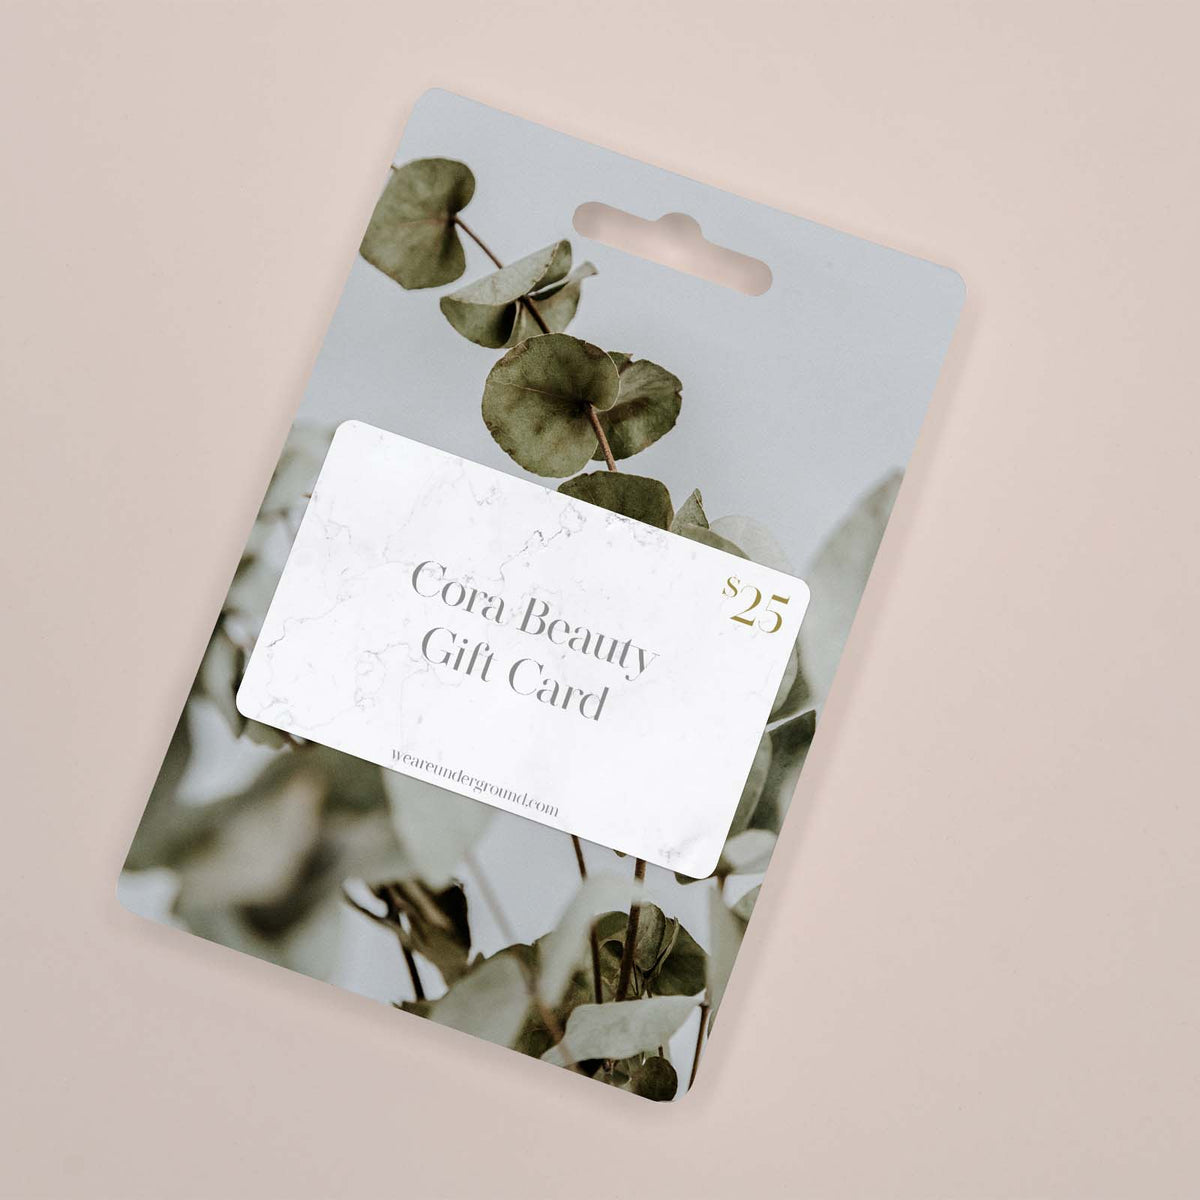 The Cora Gift Card